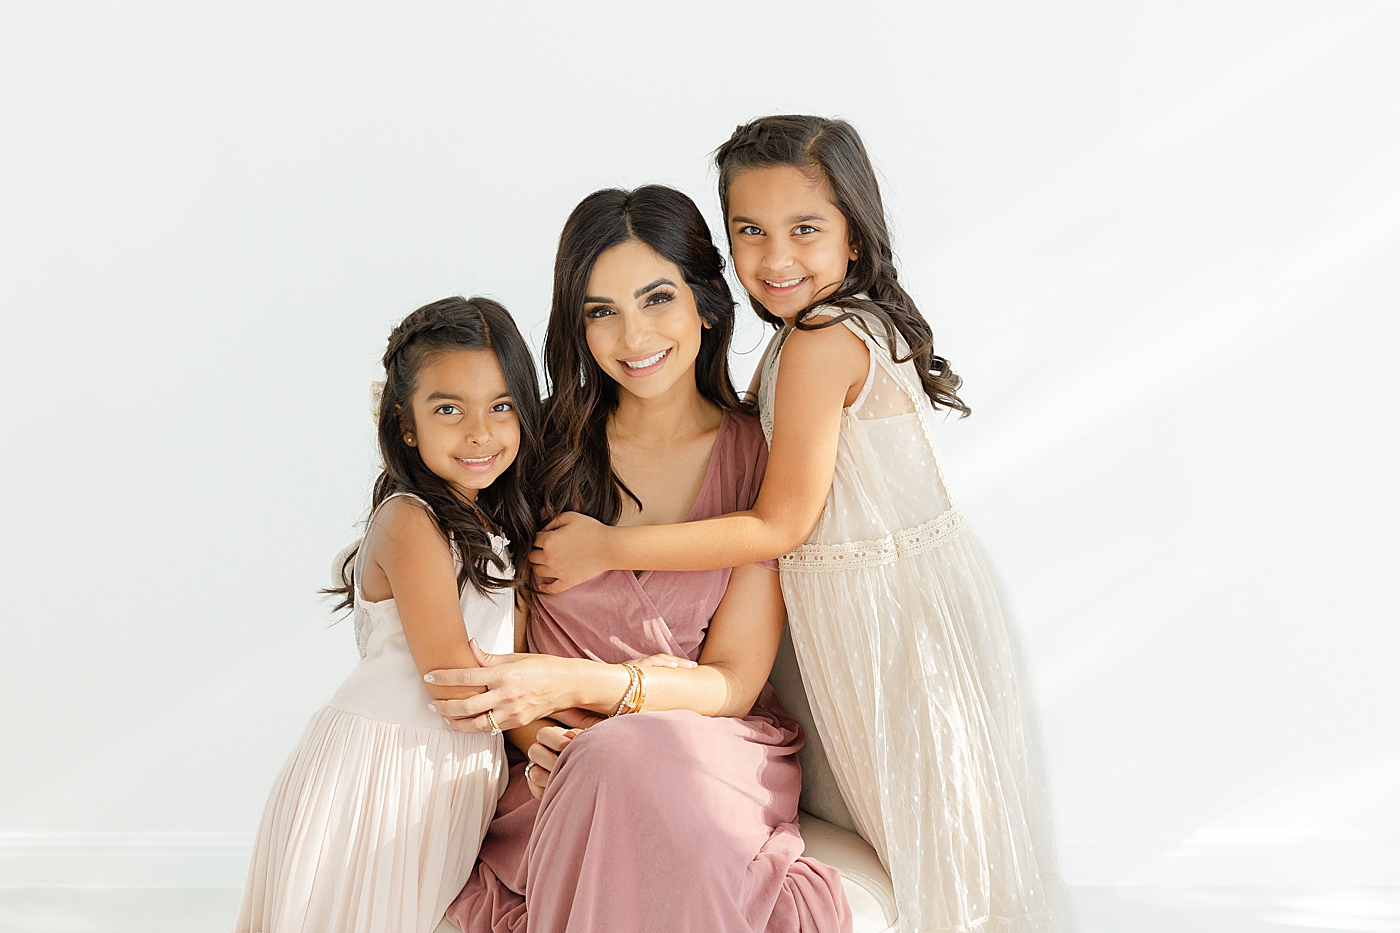 Mom hugging her two daughters in the studio | Image by Sana Ahmed Photography